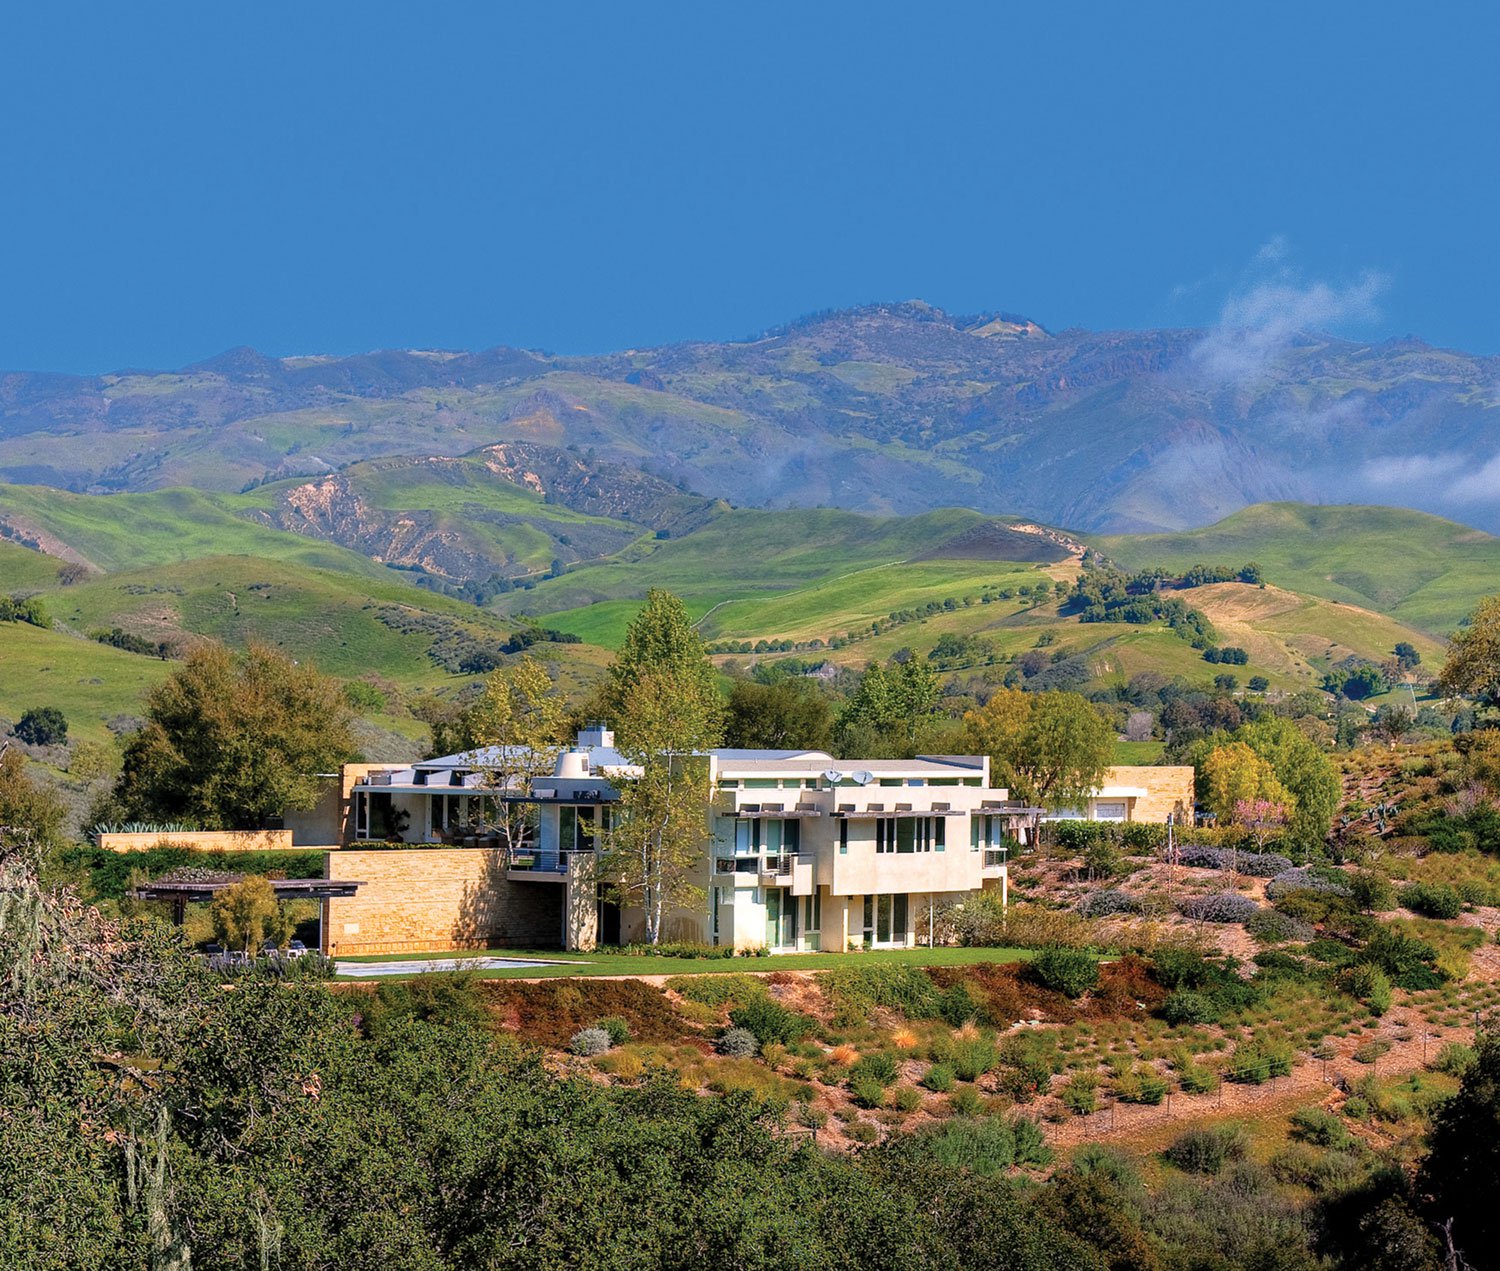 This architecturally significant modernist house and equestrian facility is set within 116 private acres of ranchland in the Santa Ynez Valley.